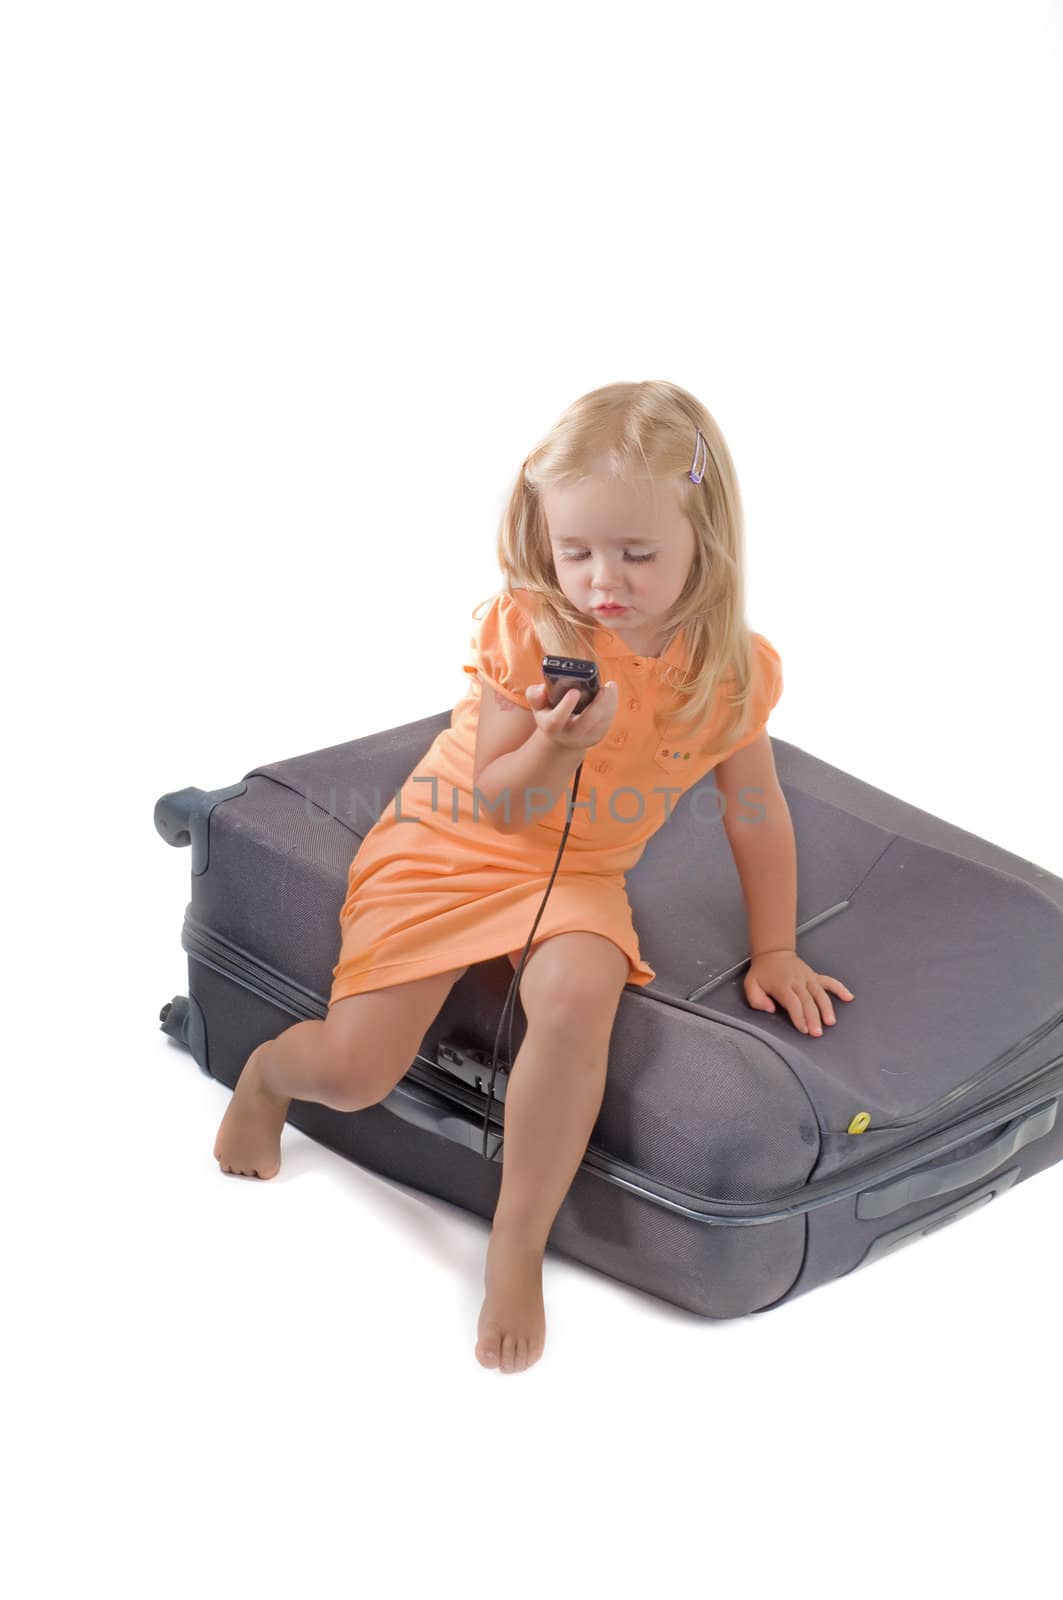 Little girl and suitcase in studio by anytka